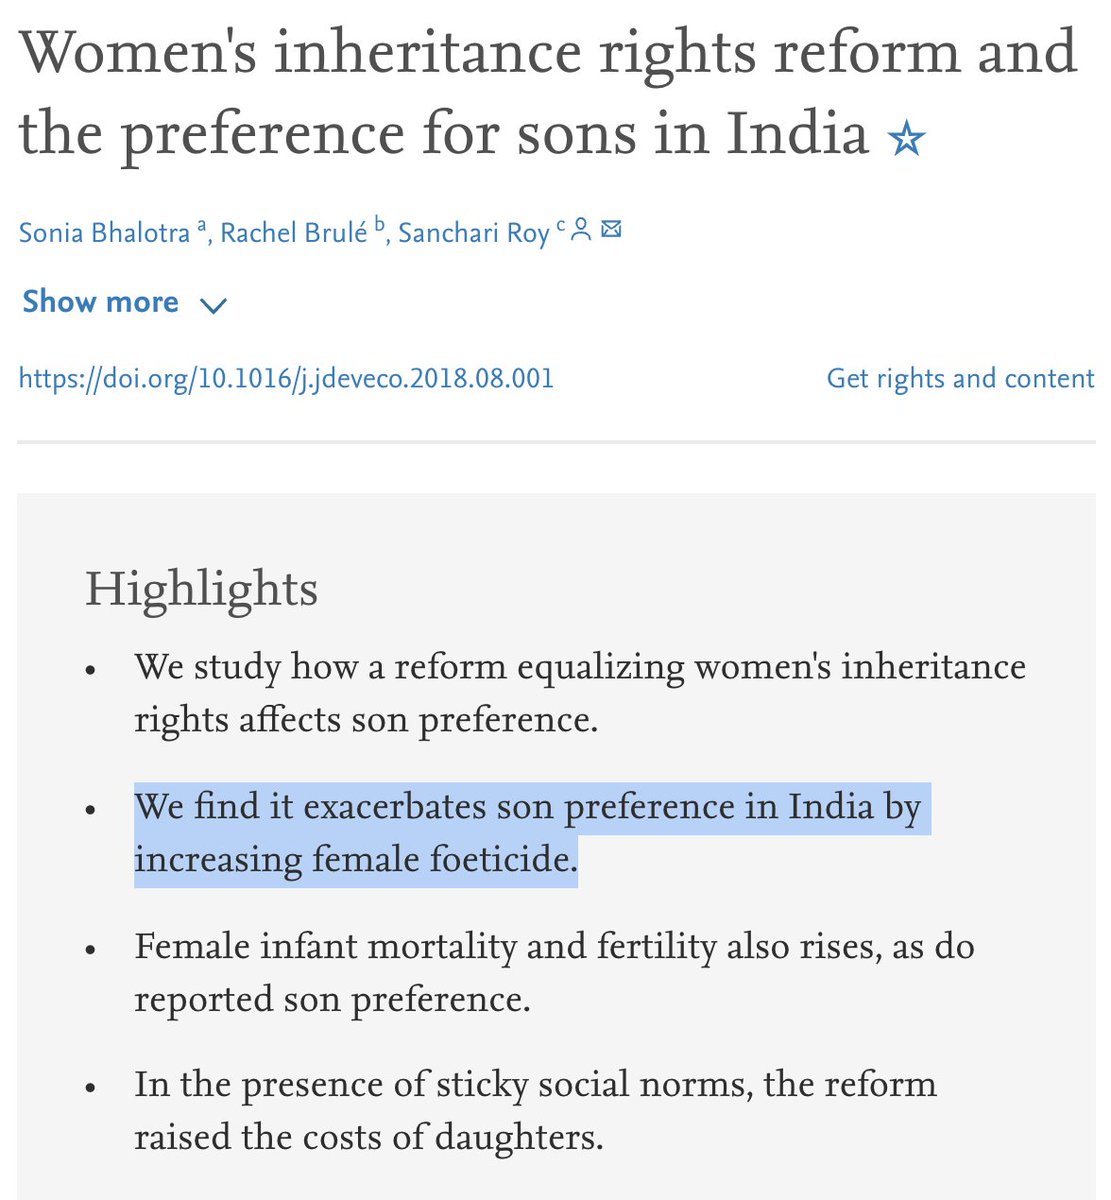 Are inheritance rights bad for women?- More sati in C19 Bengal where widows had property rights- More foeticide & cousin marriage w/ female inheritance in - Islamic inheritance rights, high cousin marriage in MENA, - Women didn't inherit in Europe & LAC so left for work